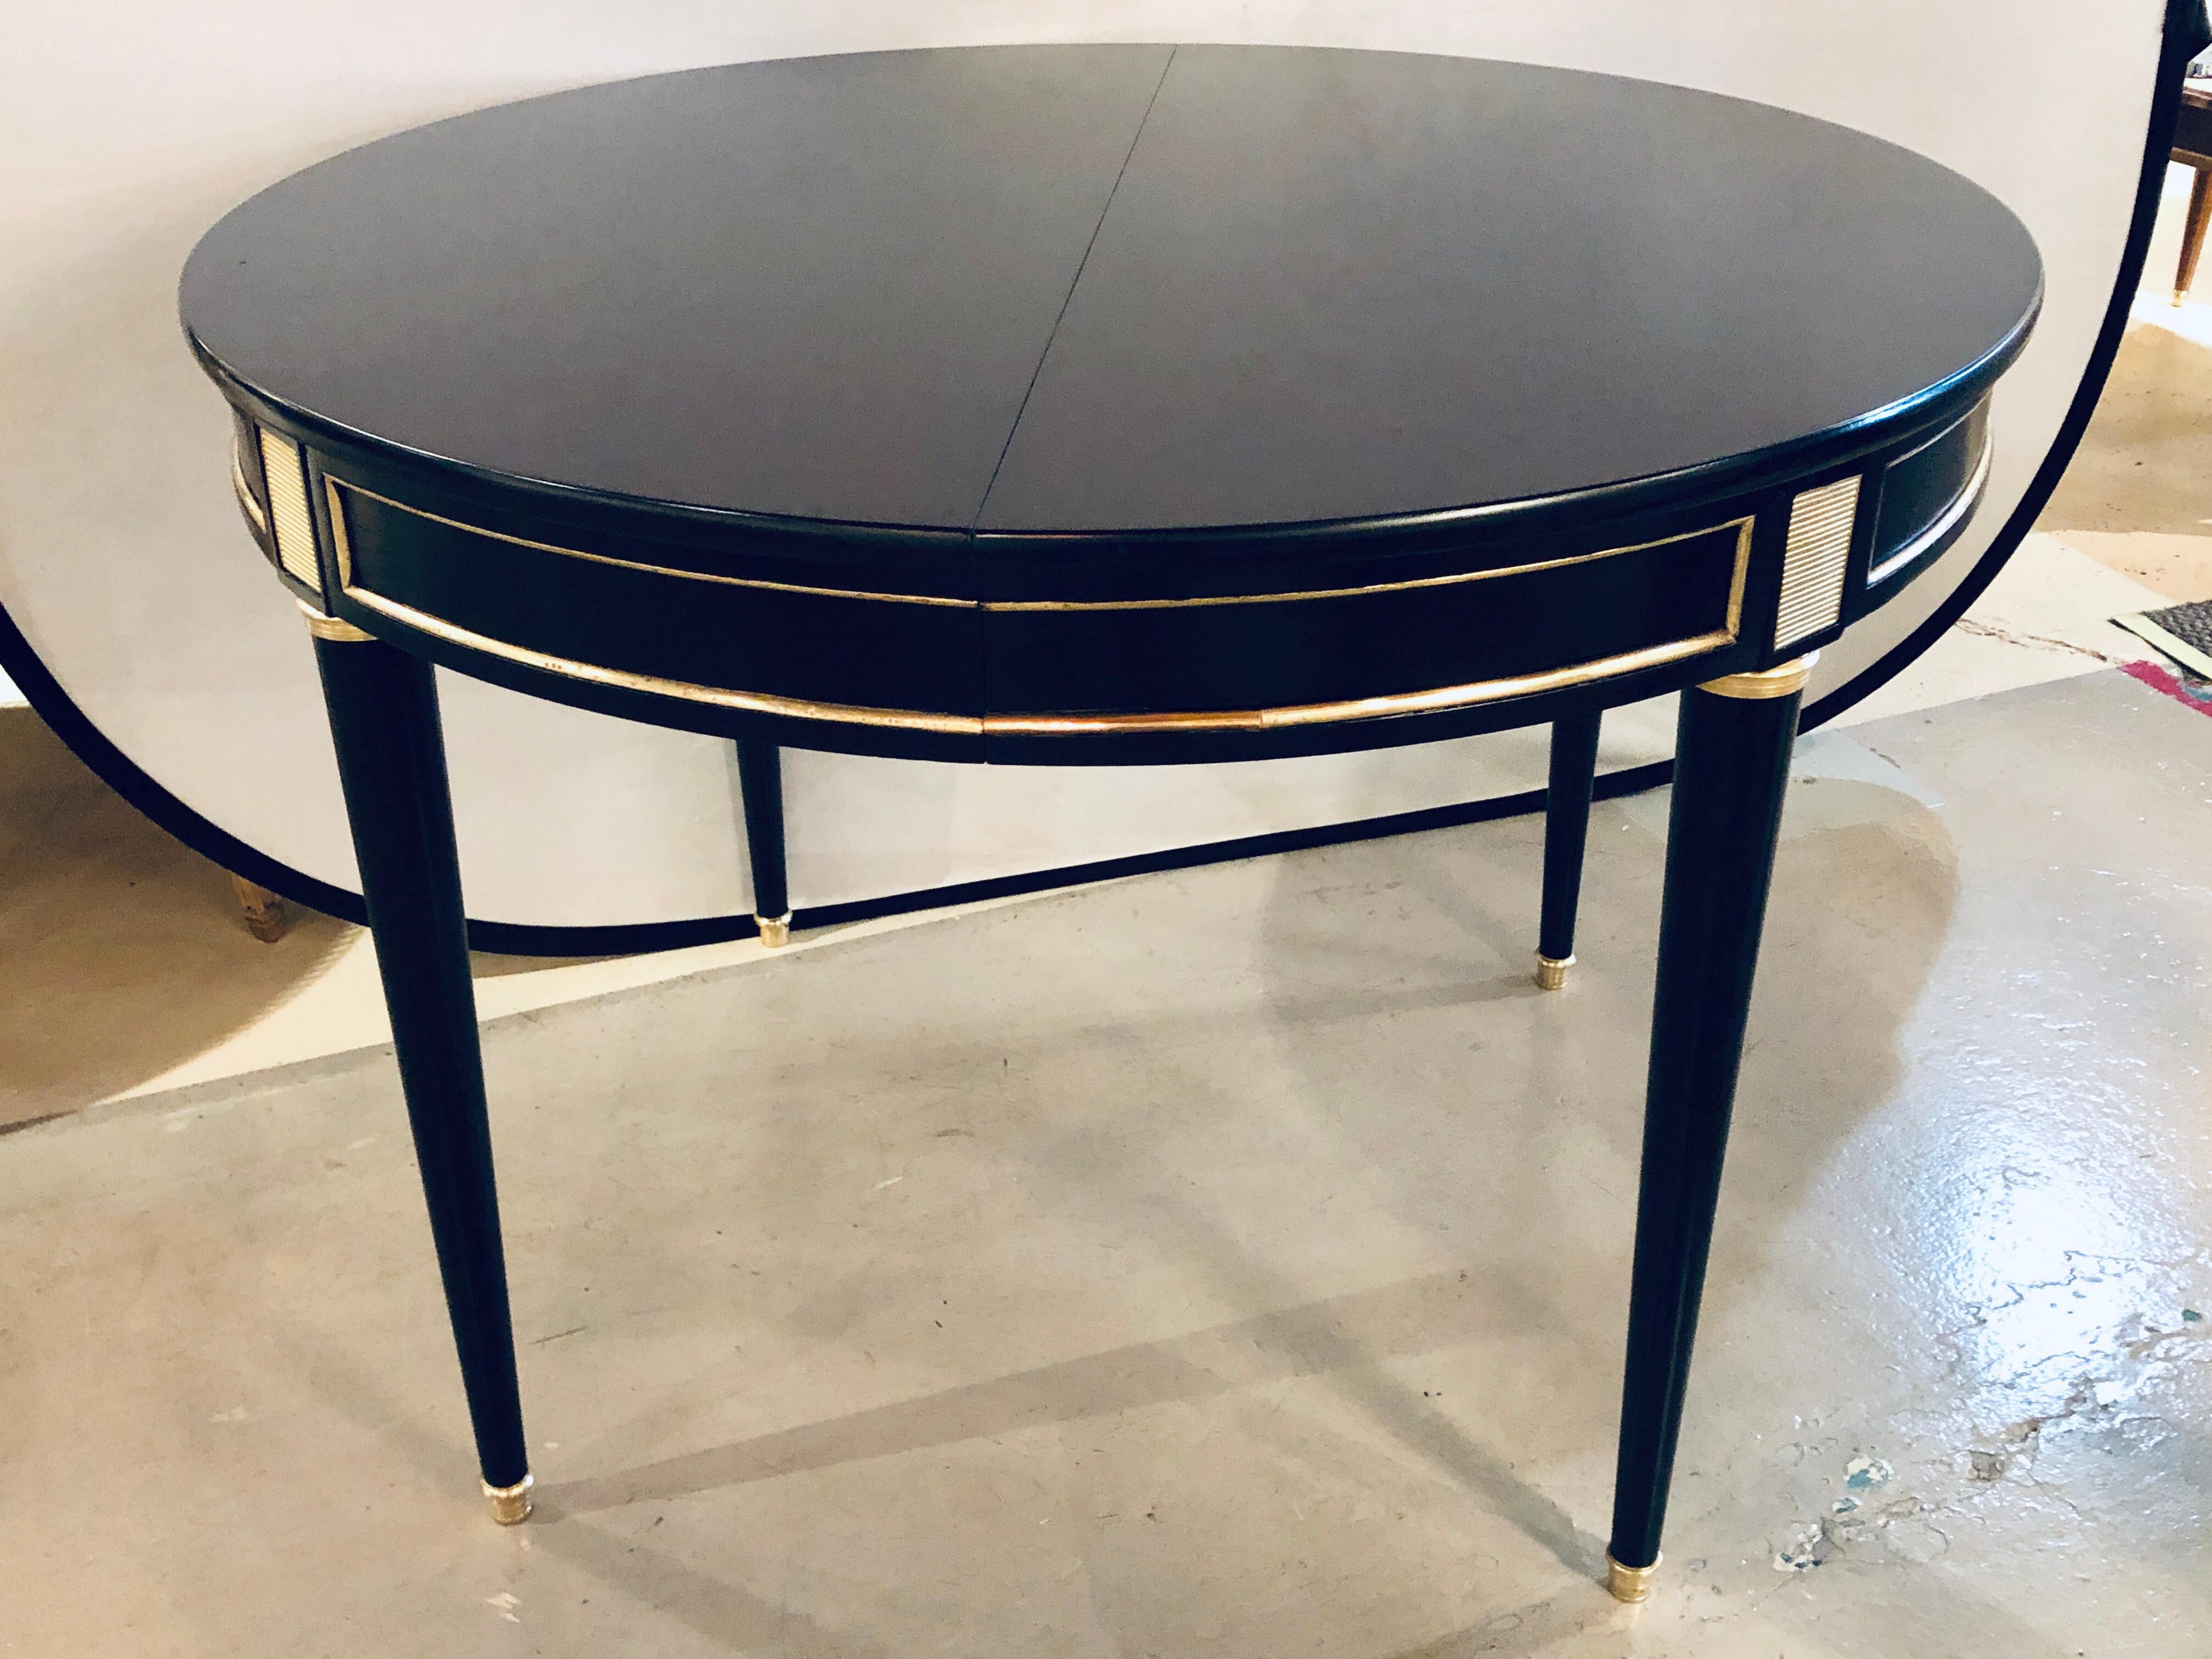 This is a stunning Hollywood Regency ebonized Maison Jansen style bronze mounted dining table which has three twenty inch table extension leaves one fully skirted. The Louis XVI style sleek and stylish legs having bronze sabots and capitals